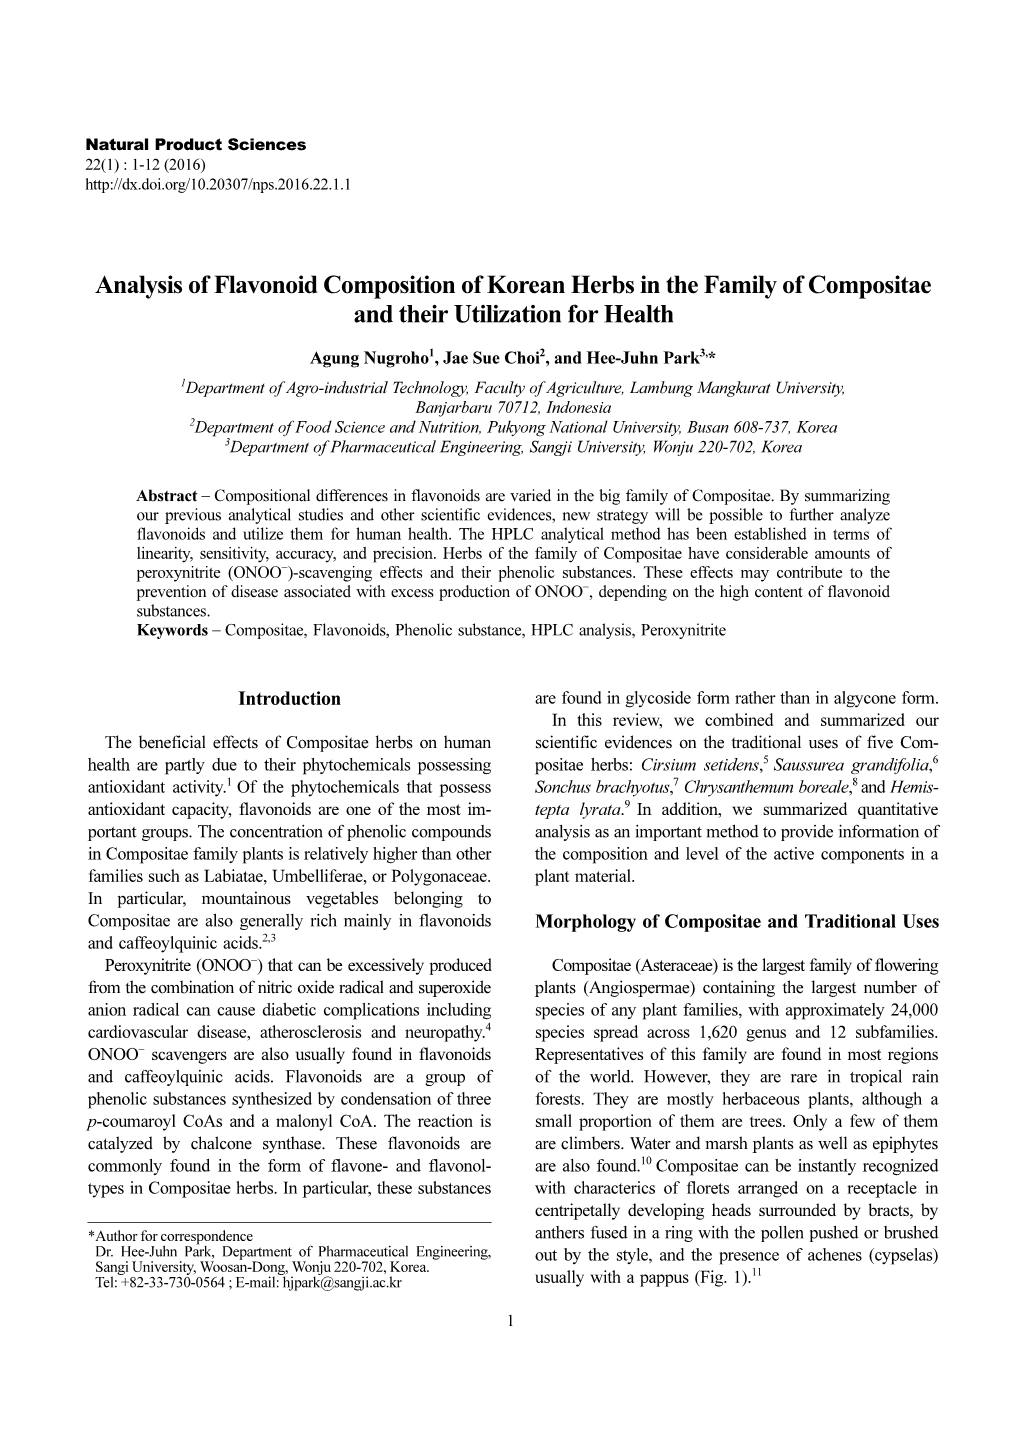 Analysis of Flavonoid Composition of Korean Herbs in the Family of Compositae and Their Utilization for Health